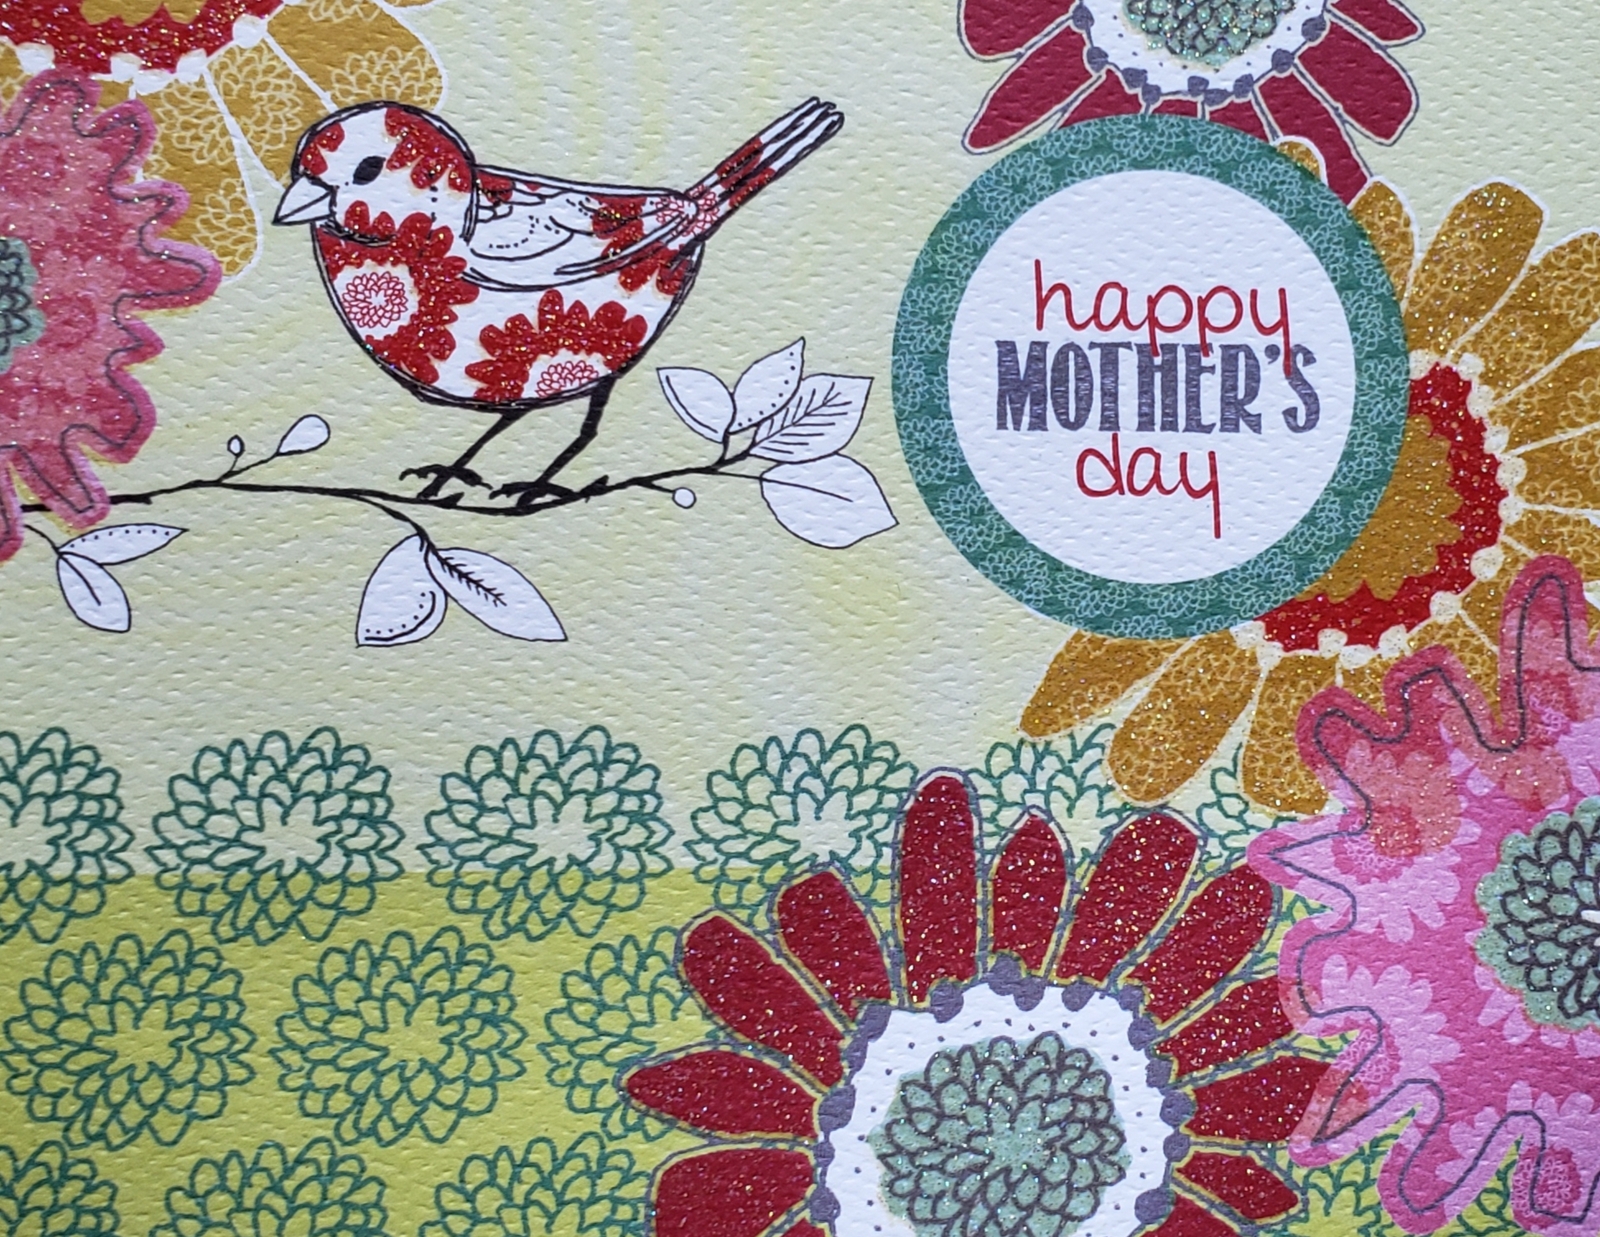 Primary image for Greeting Card Mothers Day Flowers "Happy Mother's Day" 